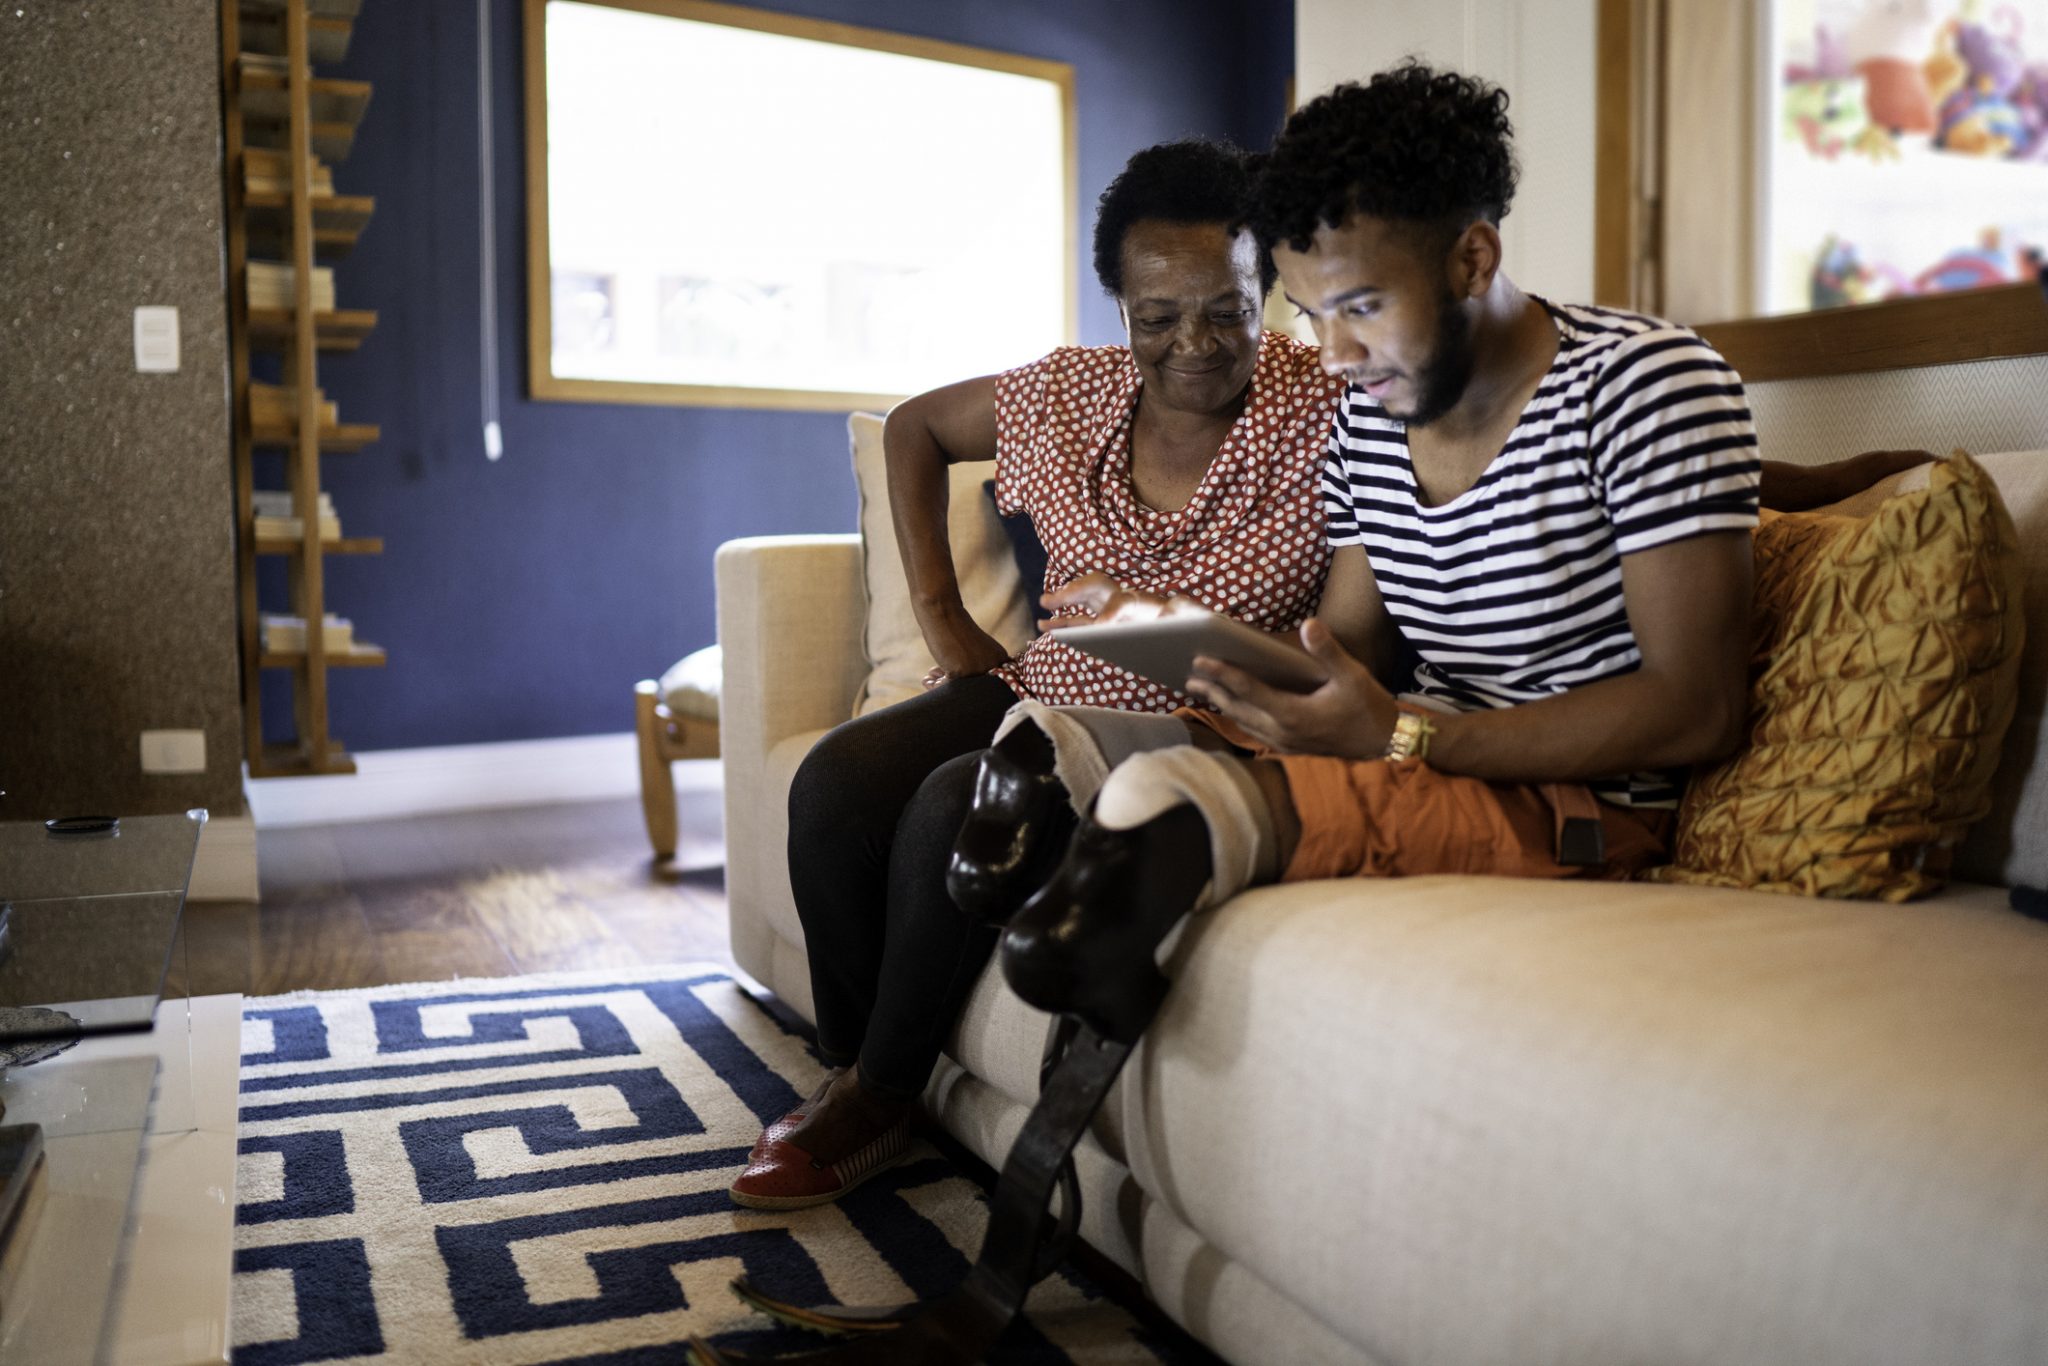 Smiling mother watches son who is an amputee gets involved with what's on his tablet device